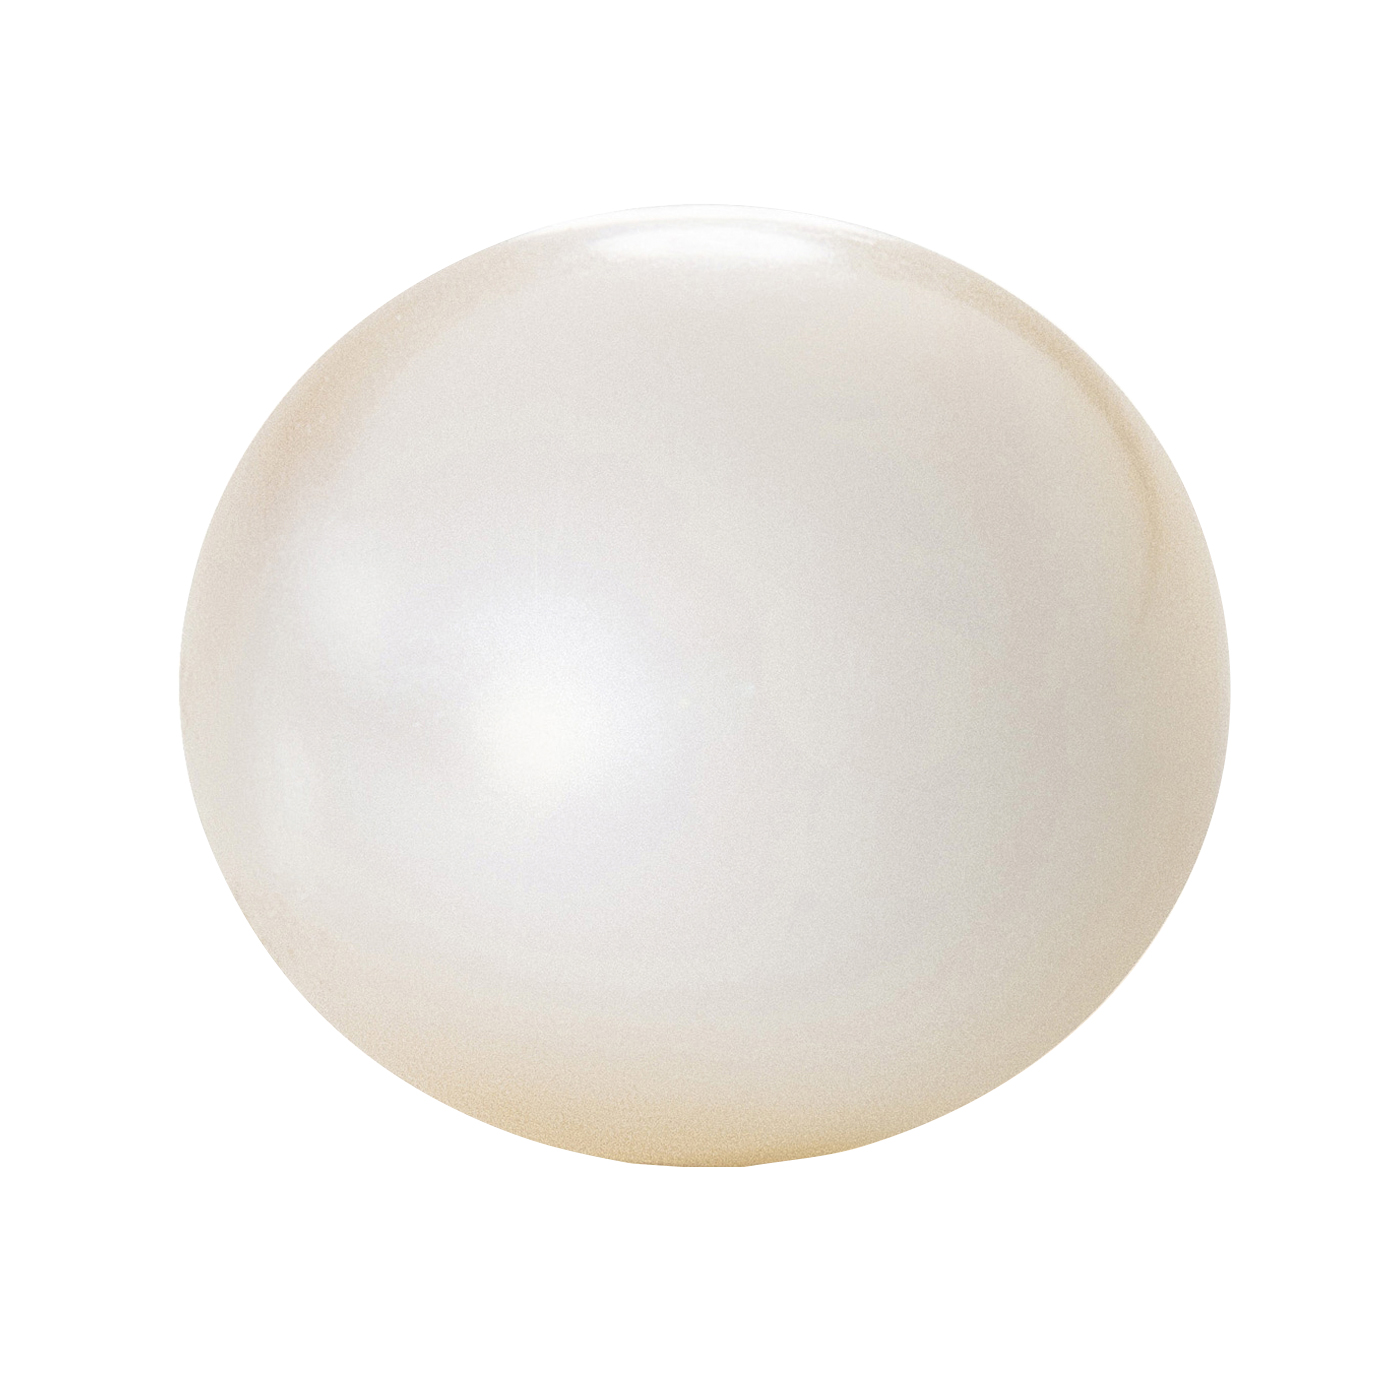 Cultured Pearl, Freshwater, Bouton, ø 9.0-9.5 mm, White - 1 piece